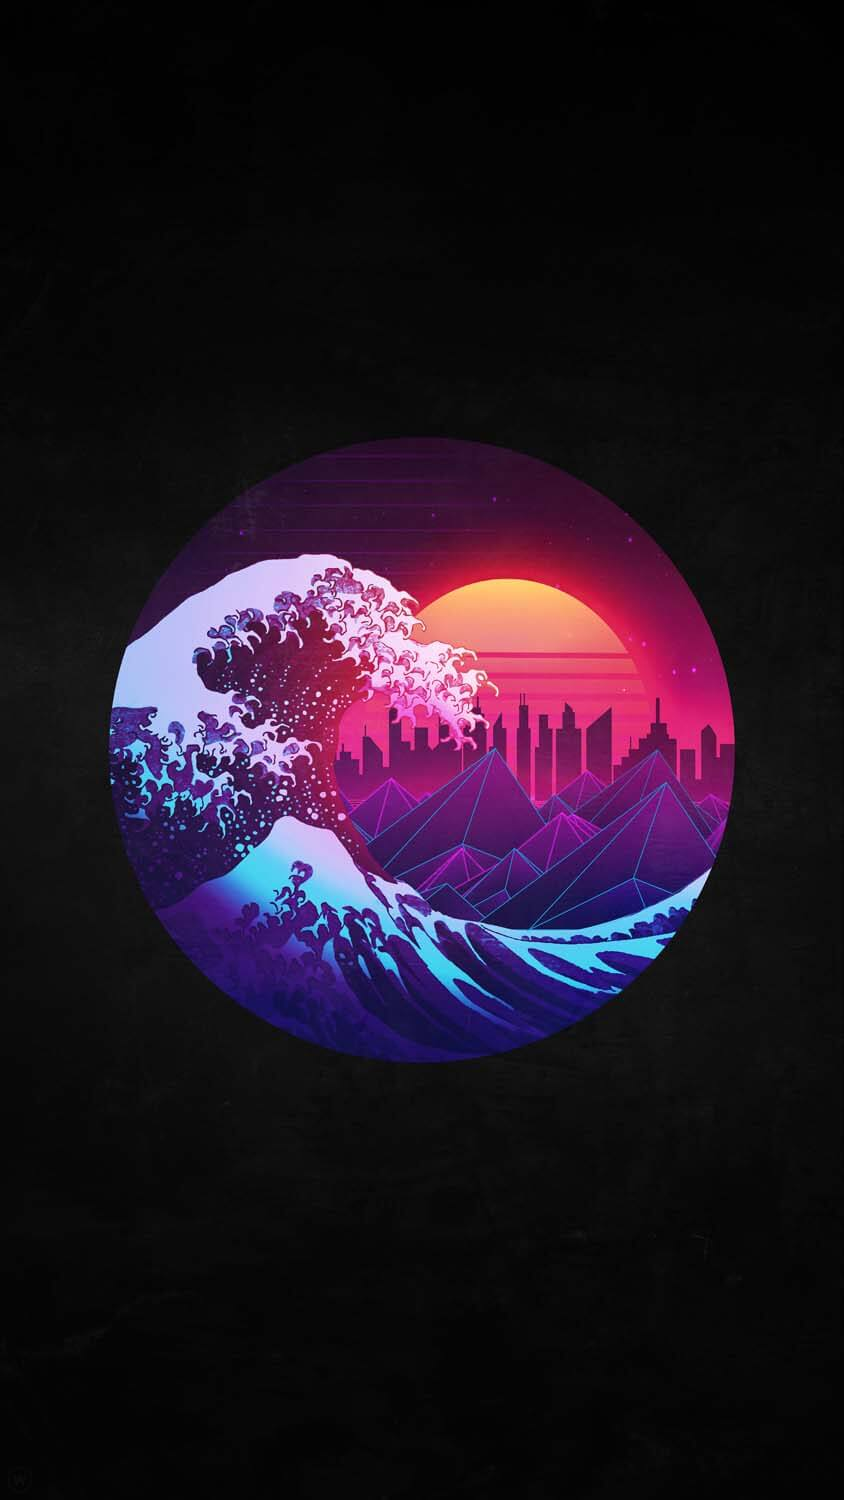 Retro Waves IPhone Wallpaper HD  IPhone Wallpapers